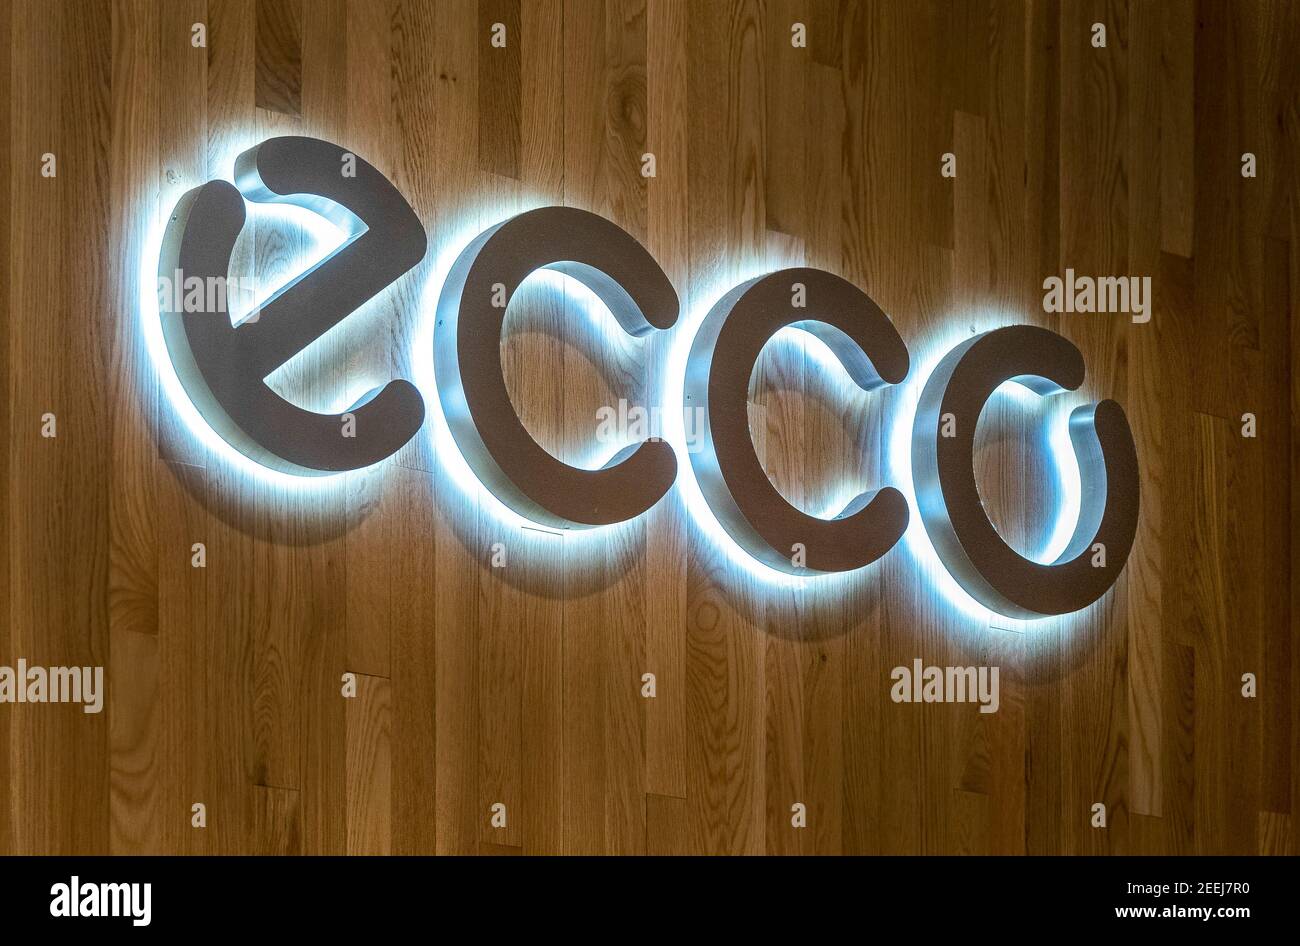 Ecco store hi-res stock photography and images - Alamy